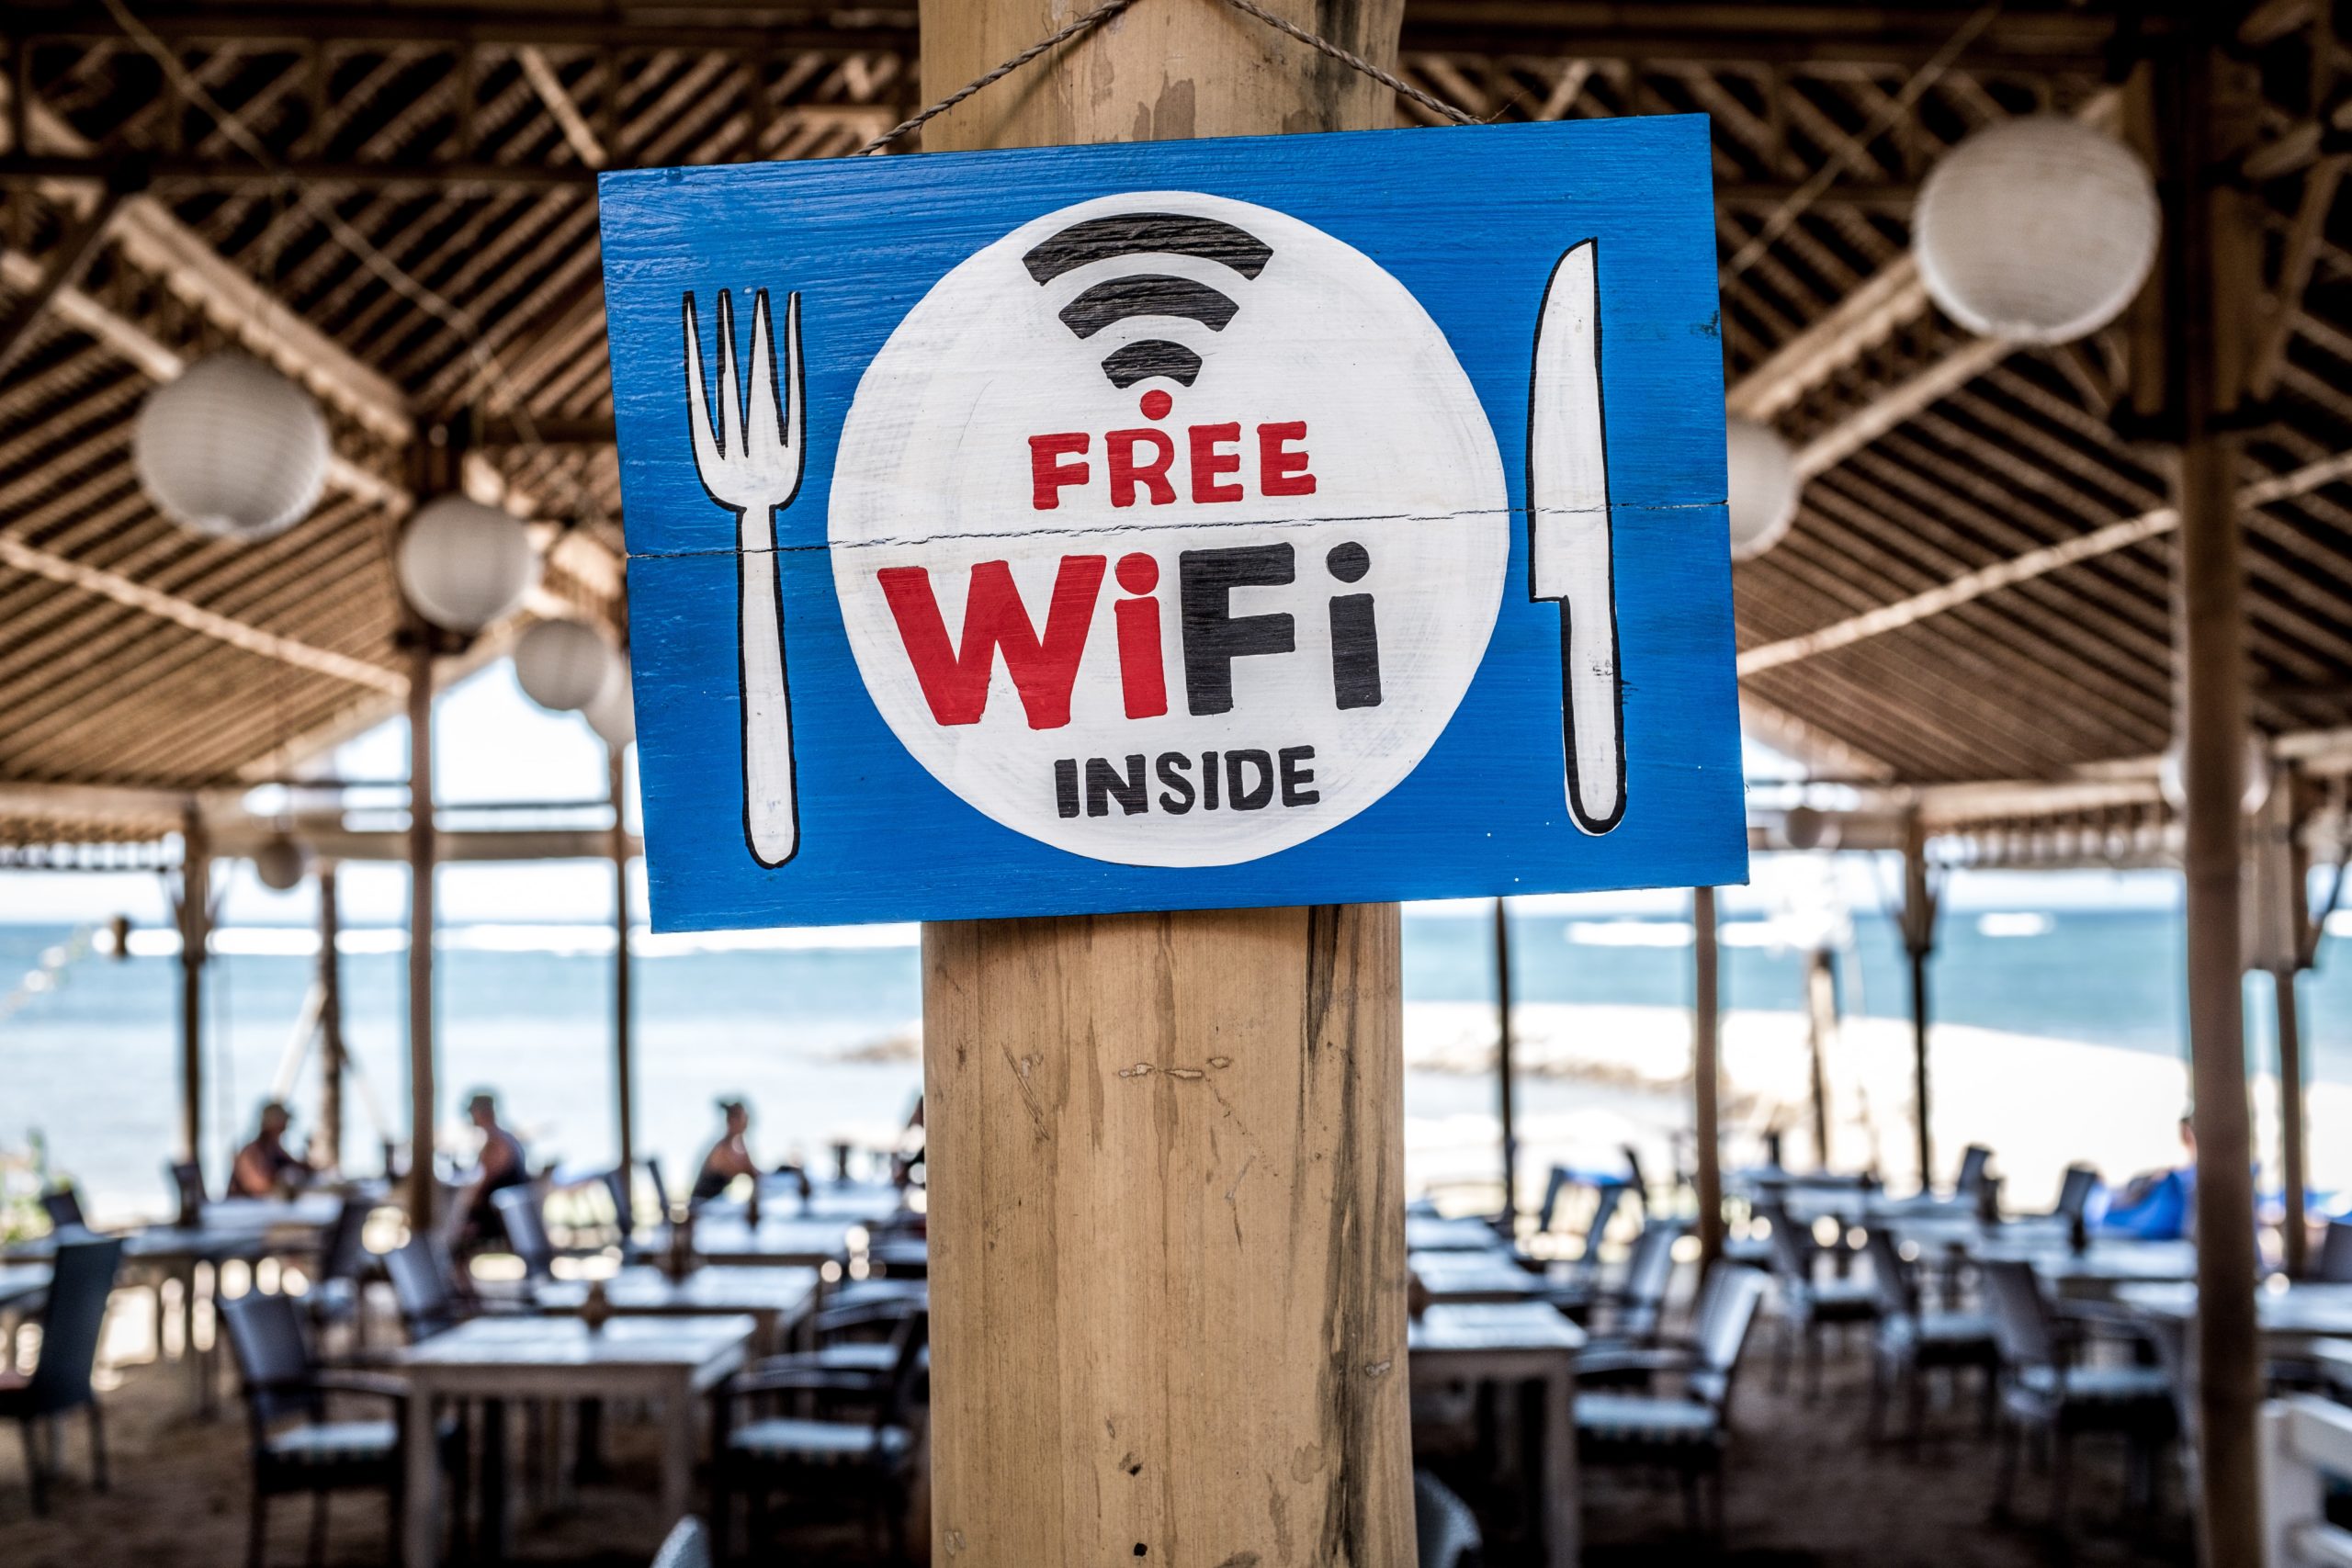 |Is Wi-Fi calling free? Yup — for the most part. Wi-Fi calling uses VoIP (Voice of Internet Protocol) technology to make and receive phone calls (and send and receive text messages) anywhere you have a Wi-Fi connection.